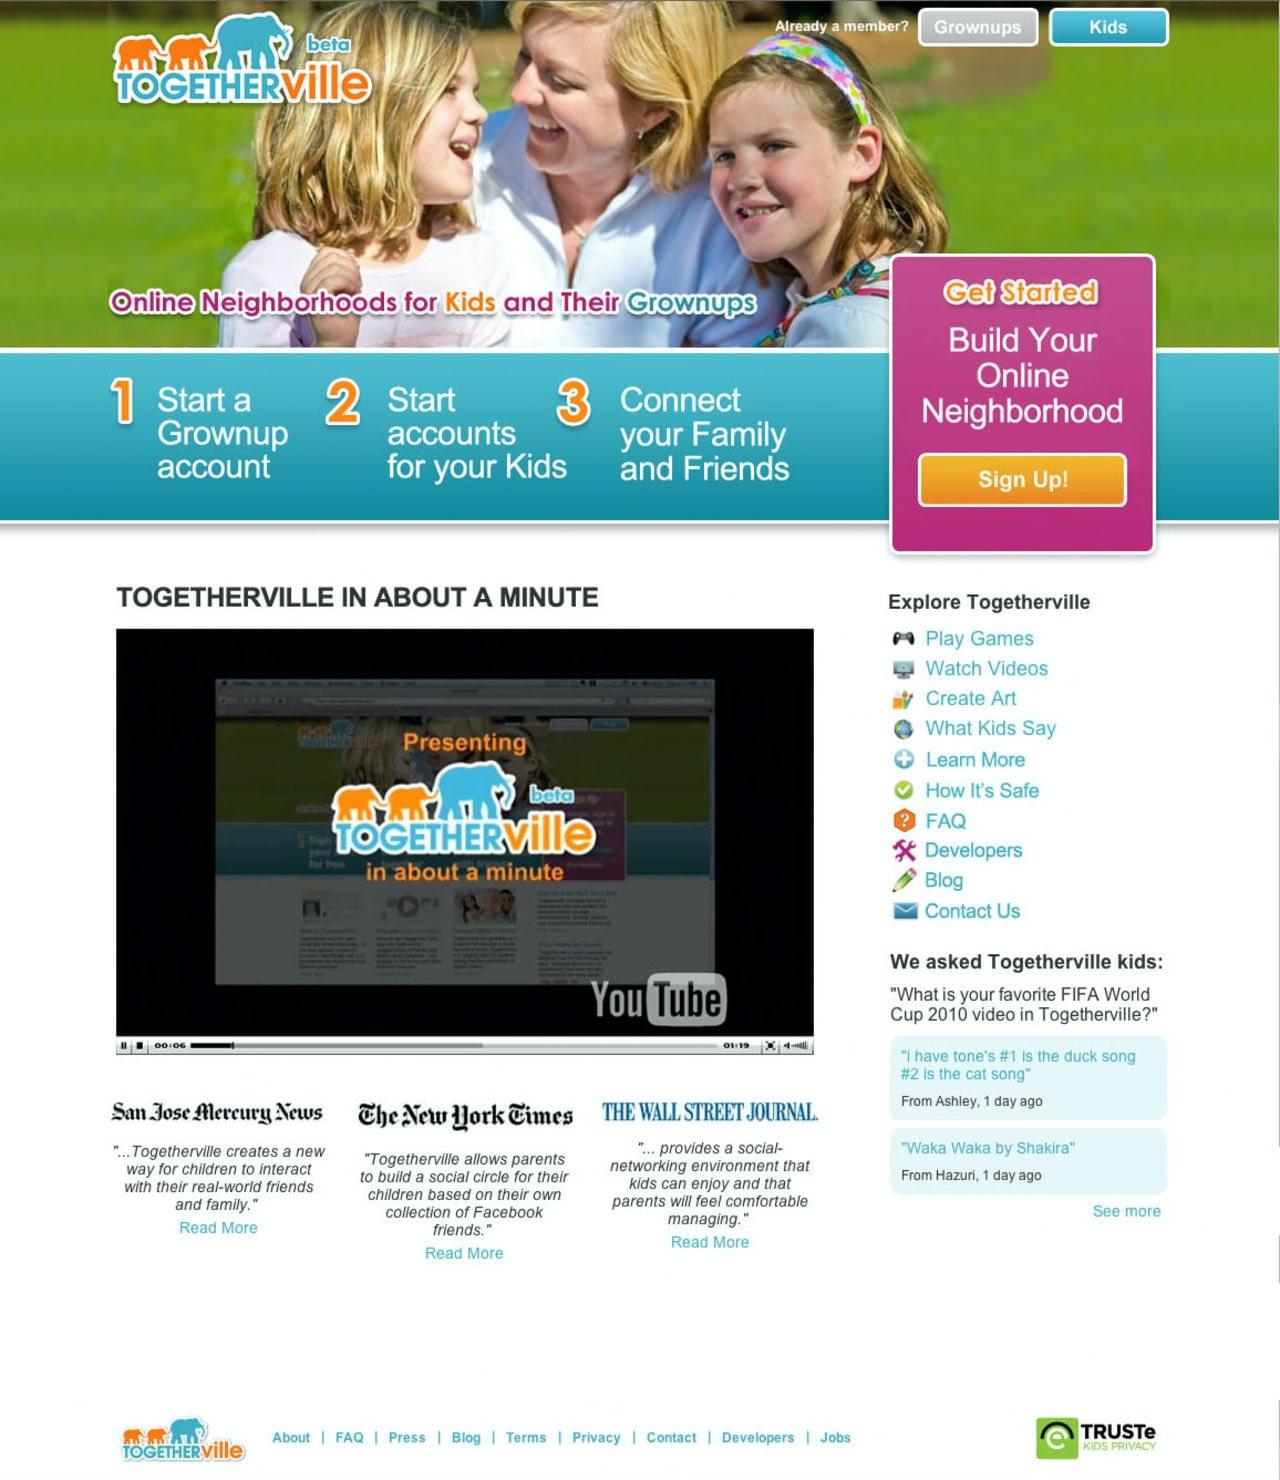 A landing page from Togetherville.com